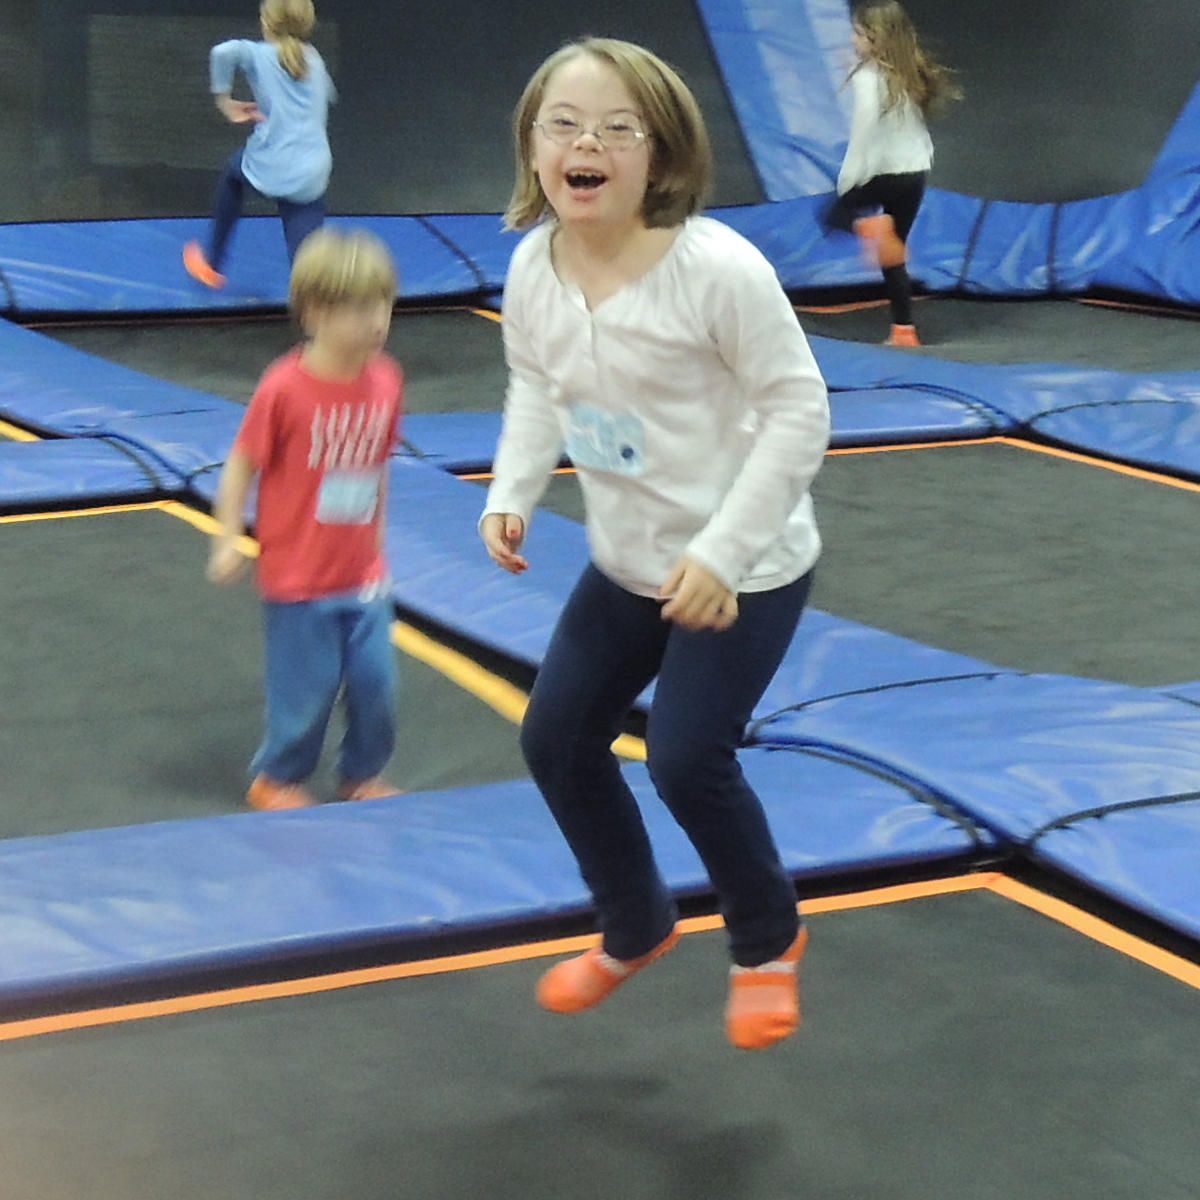 Penny at the trampoline park